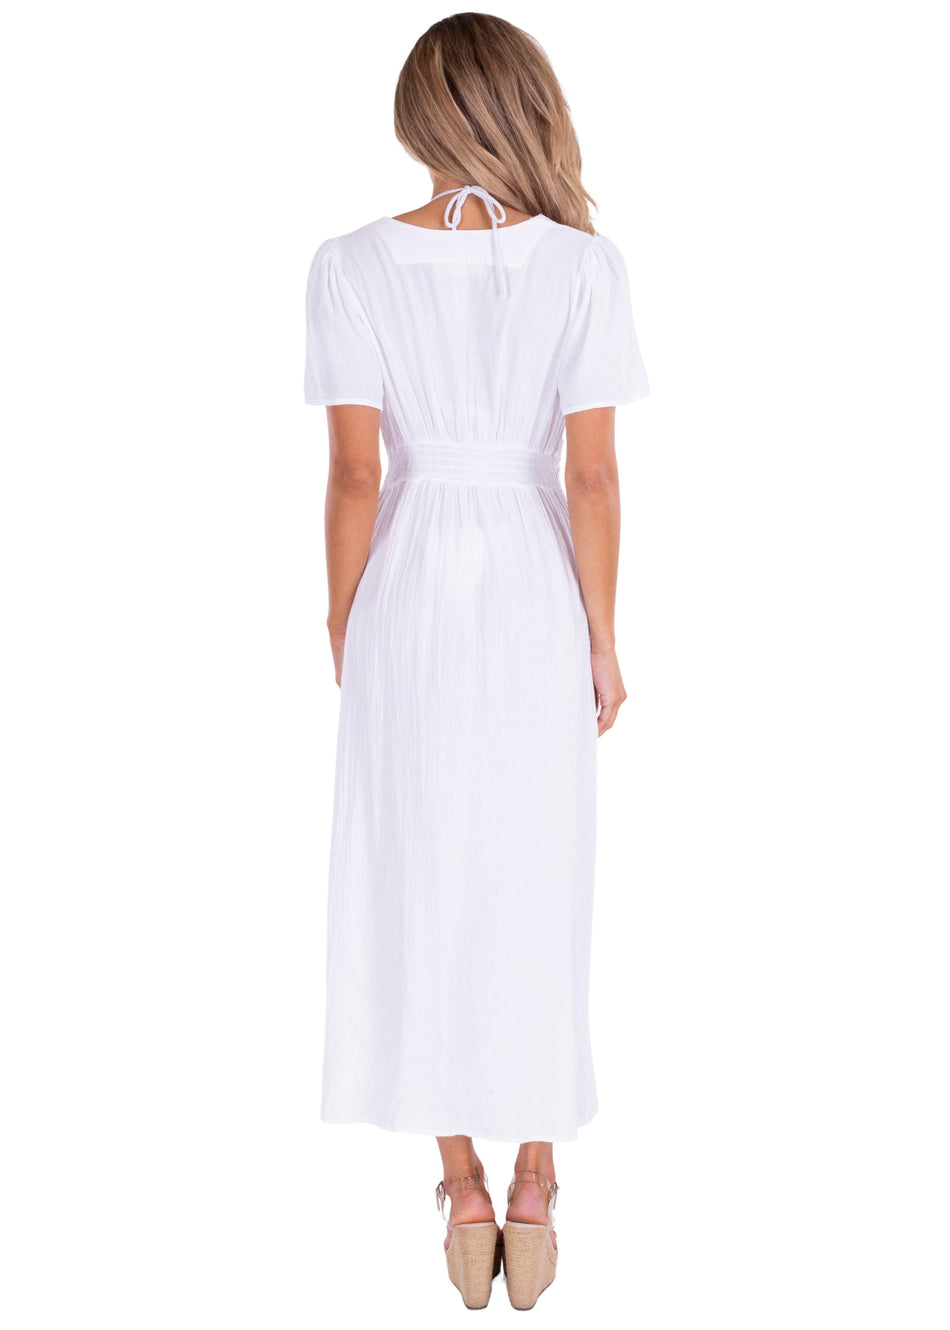 NW1534 - White Cotton Cover-Up